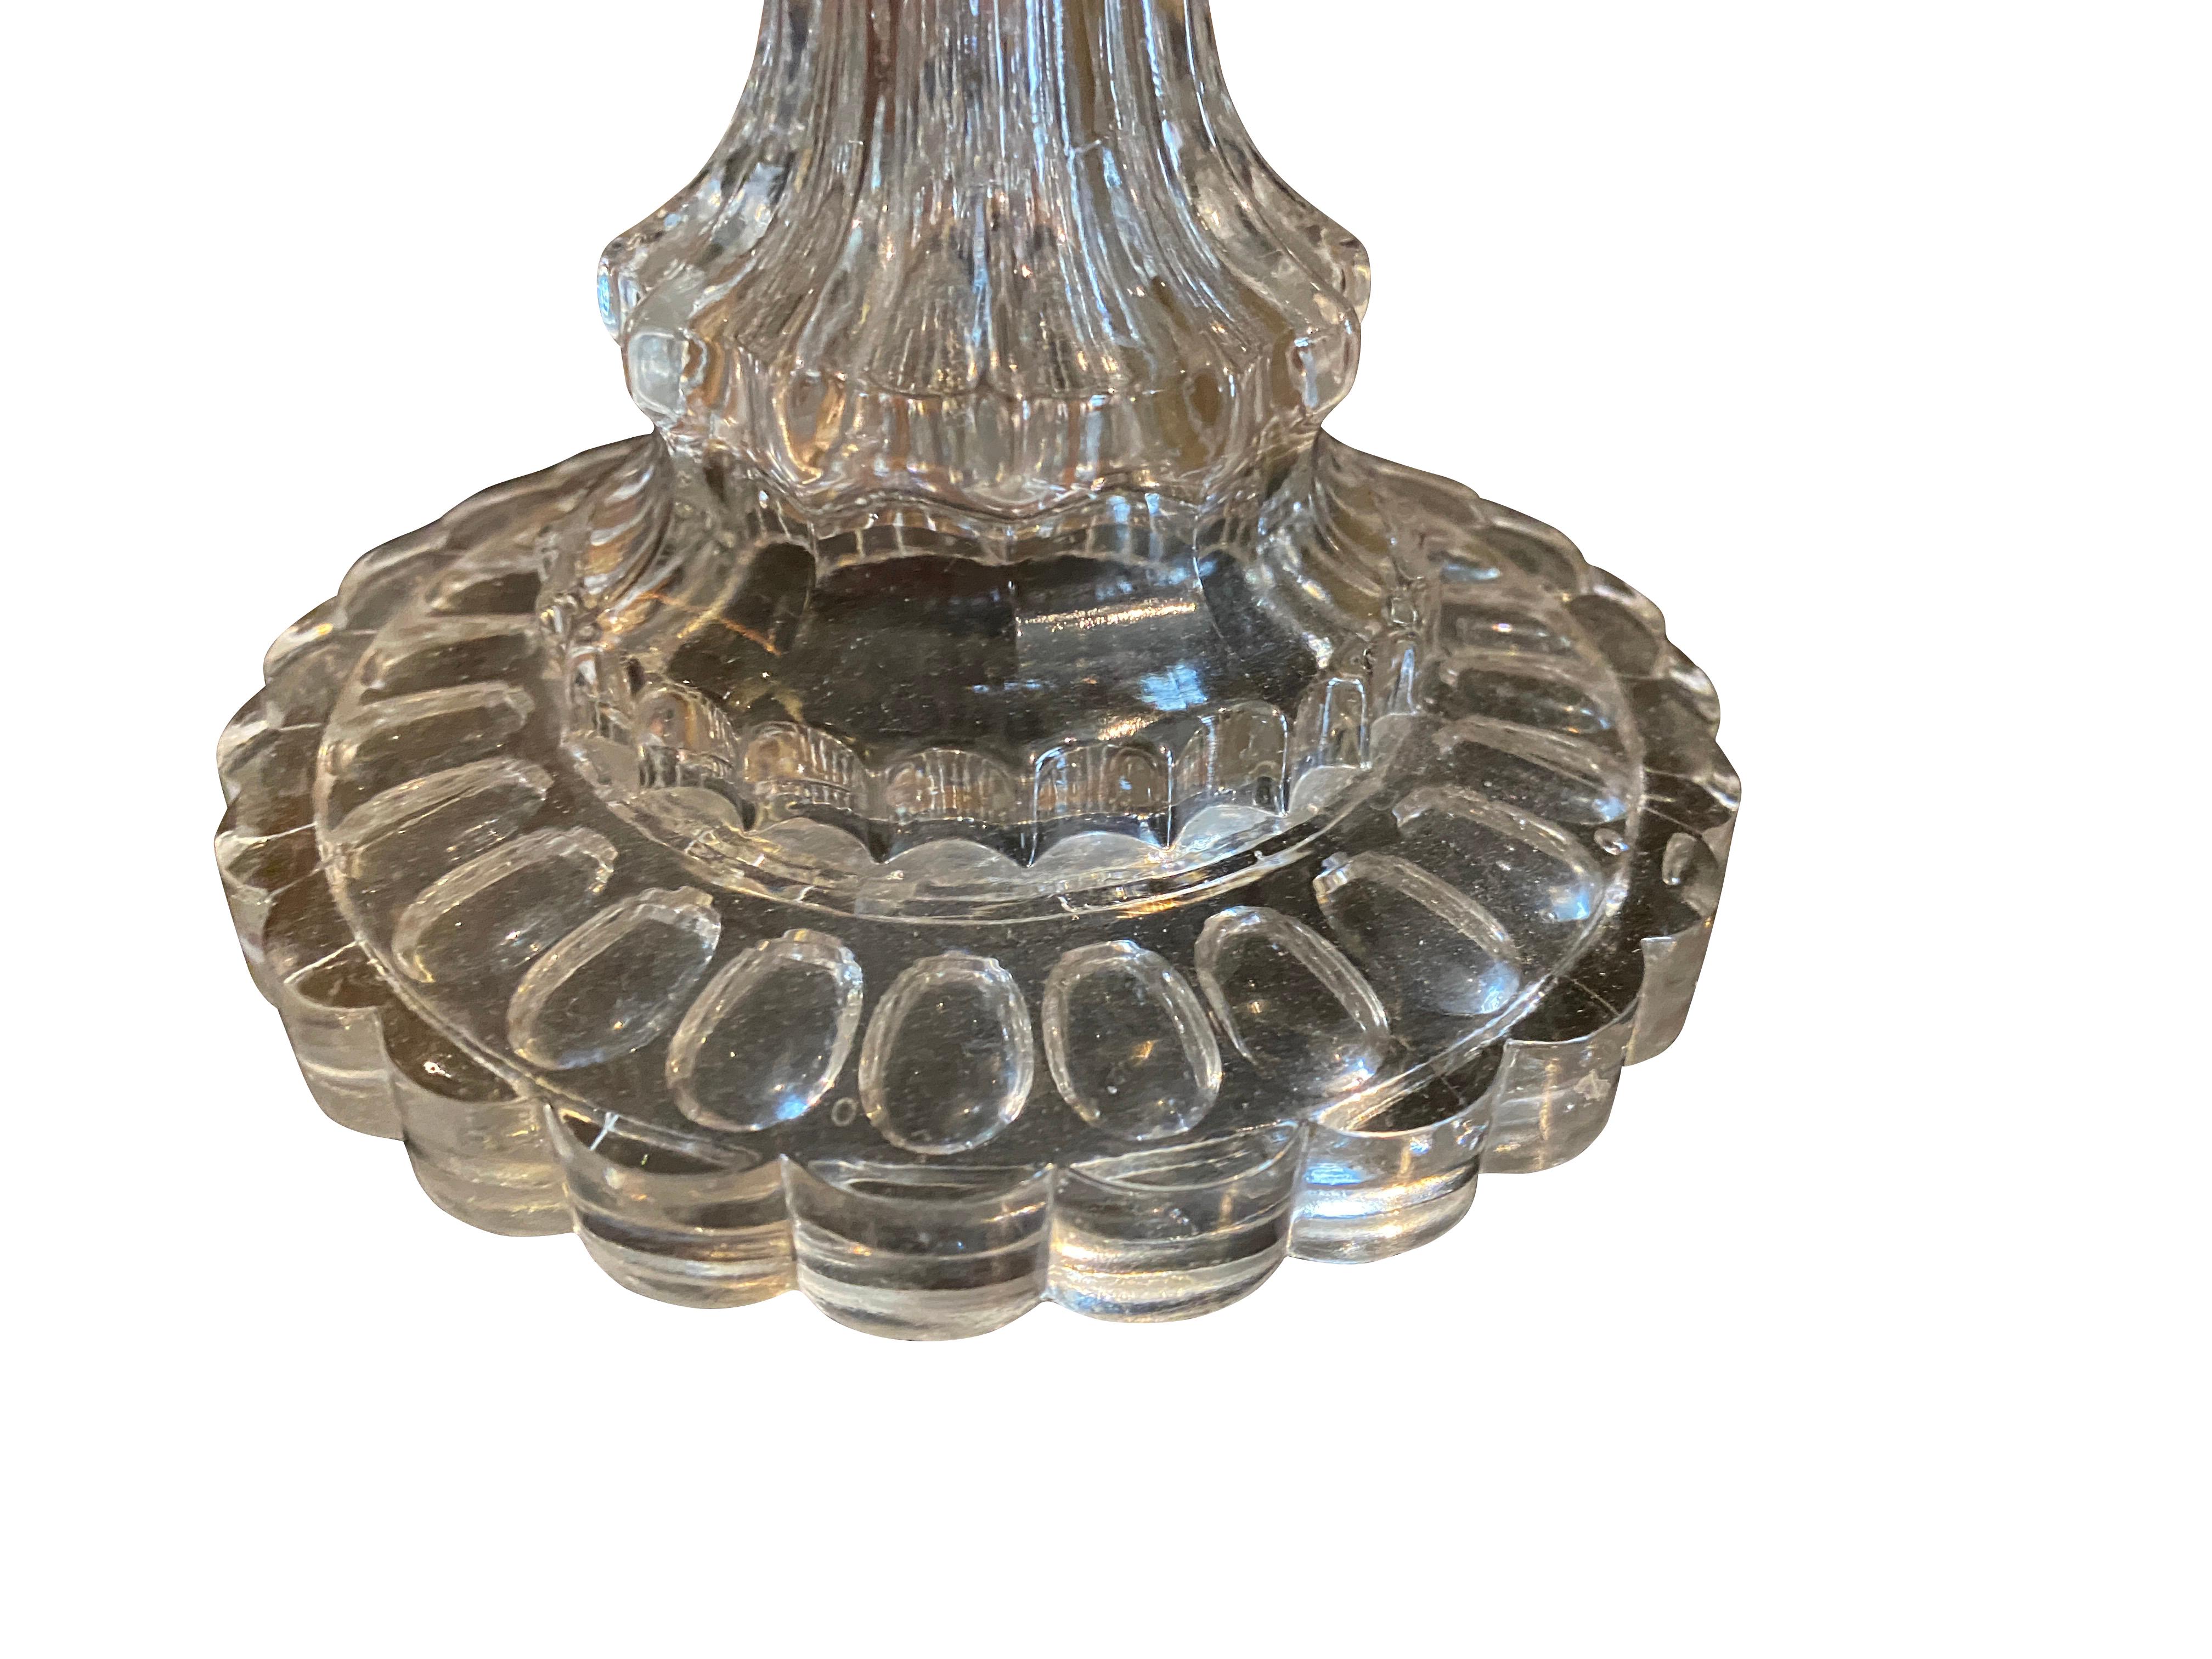 Argus pattern or thumbprint glass compote by Bakewell & Pears & Company of Pittsburgh, Pennsylvania circa 1860. The colorless lead glass compote features a 32-scallop rim above seven rows of thumbprints. The rims of the cover and bowl bit seamlessly